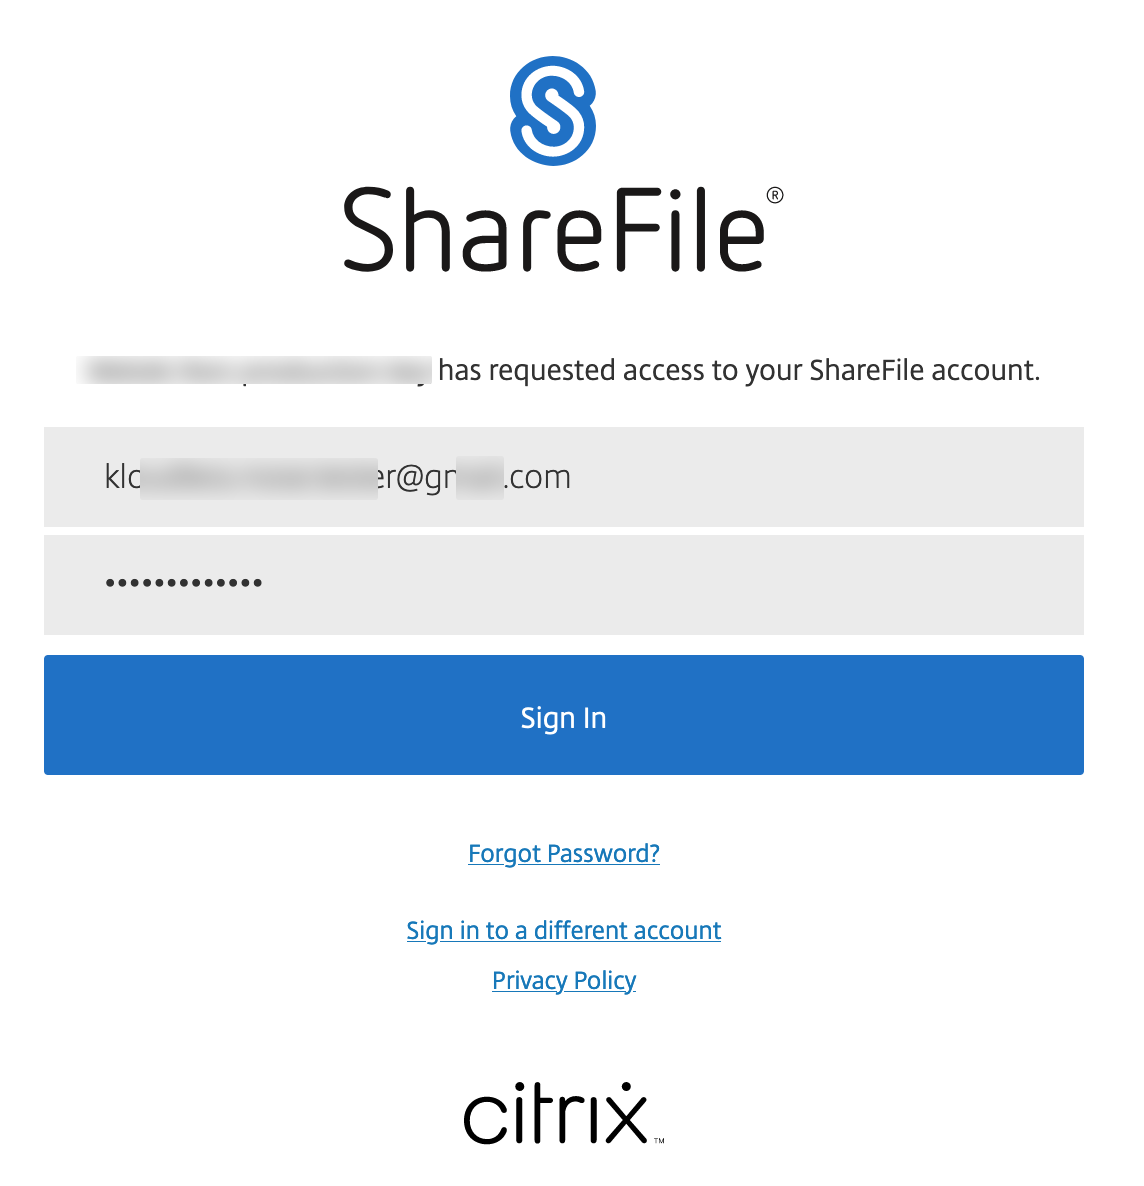 Citrix ShareFile Email and Password Window